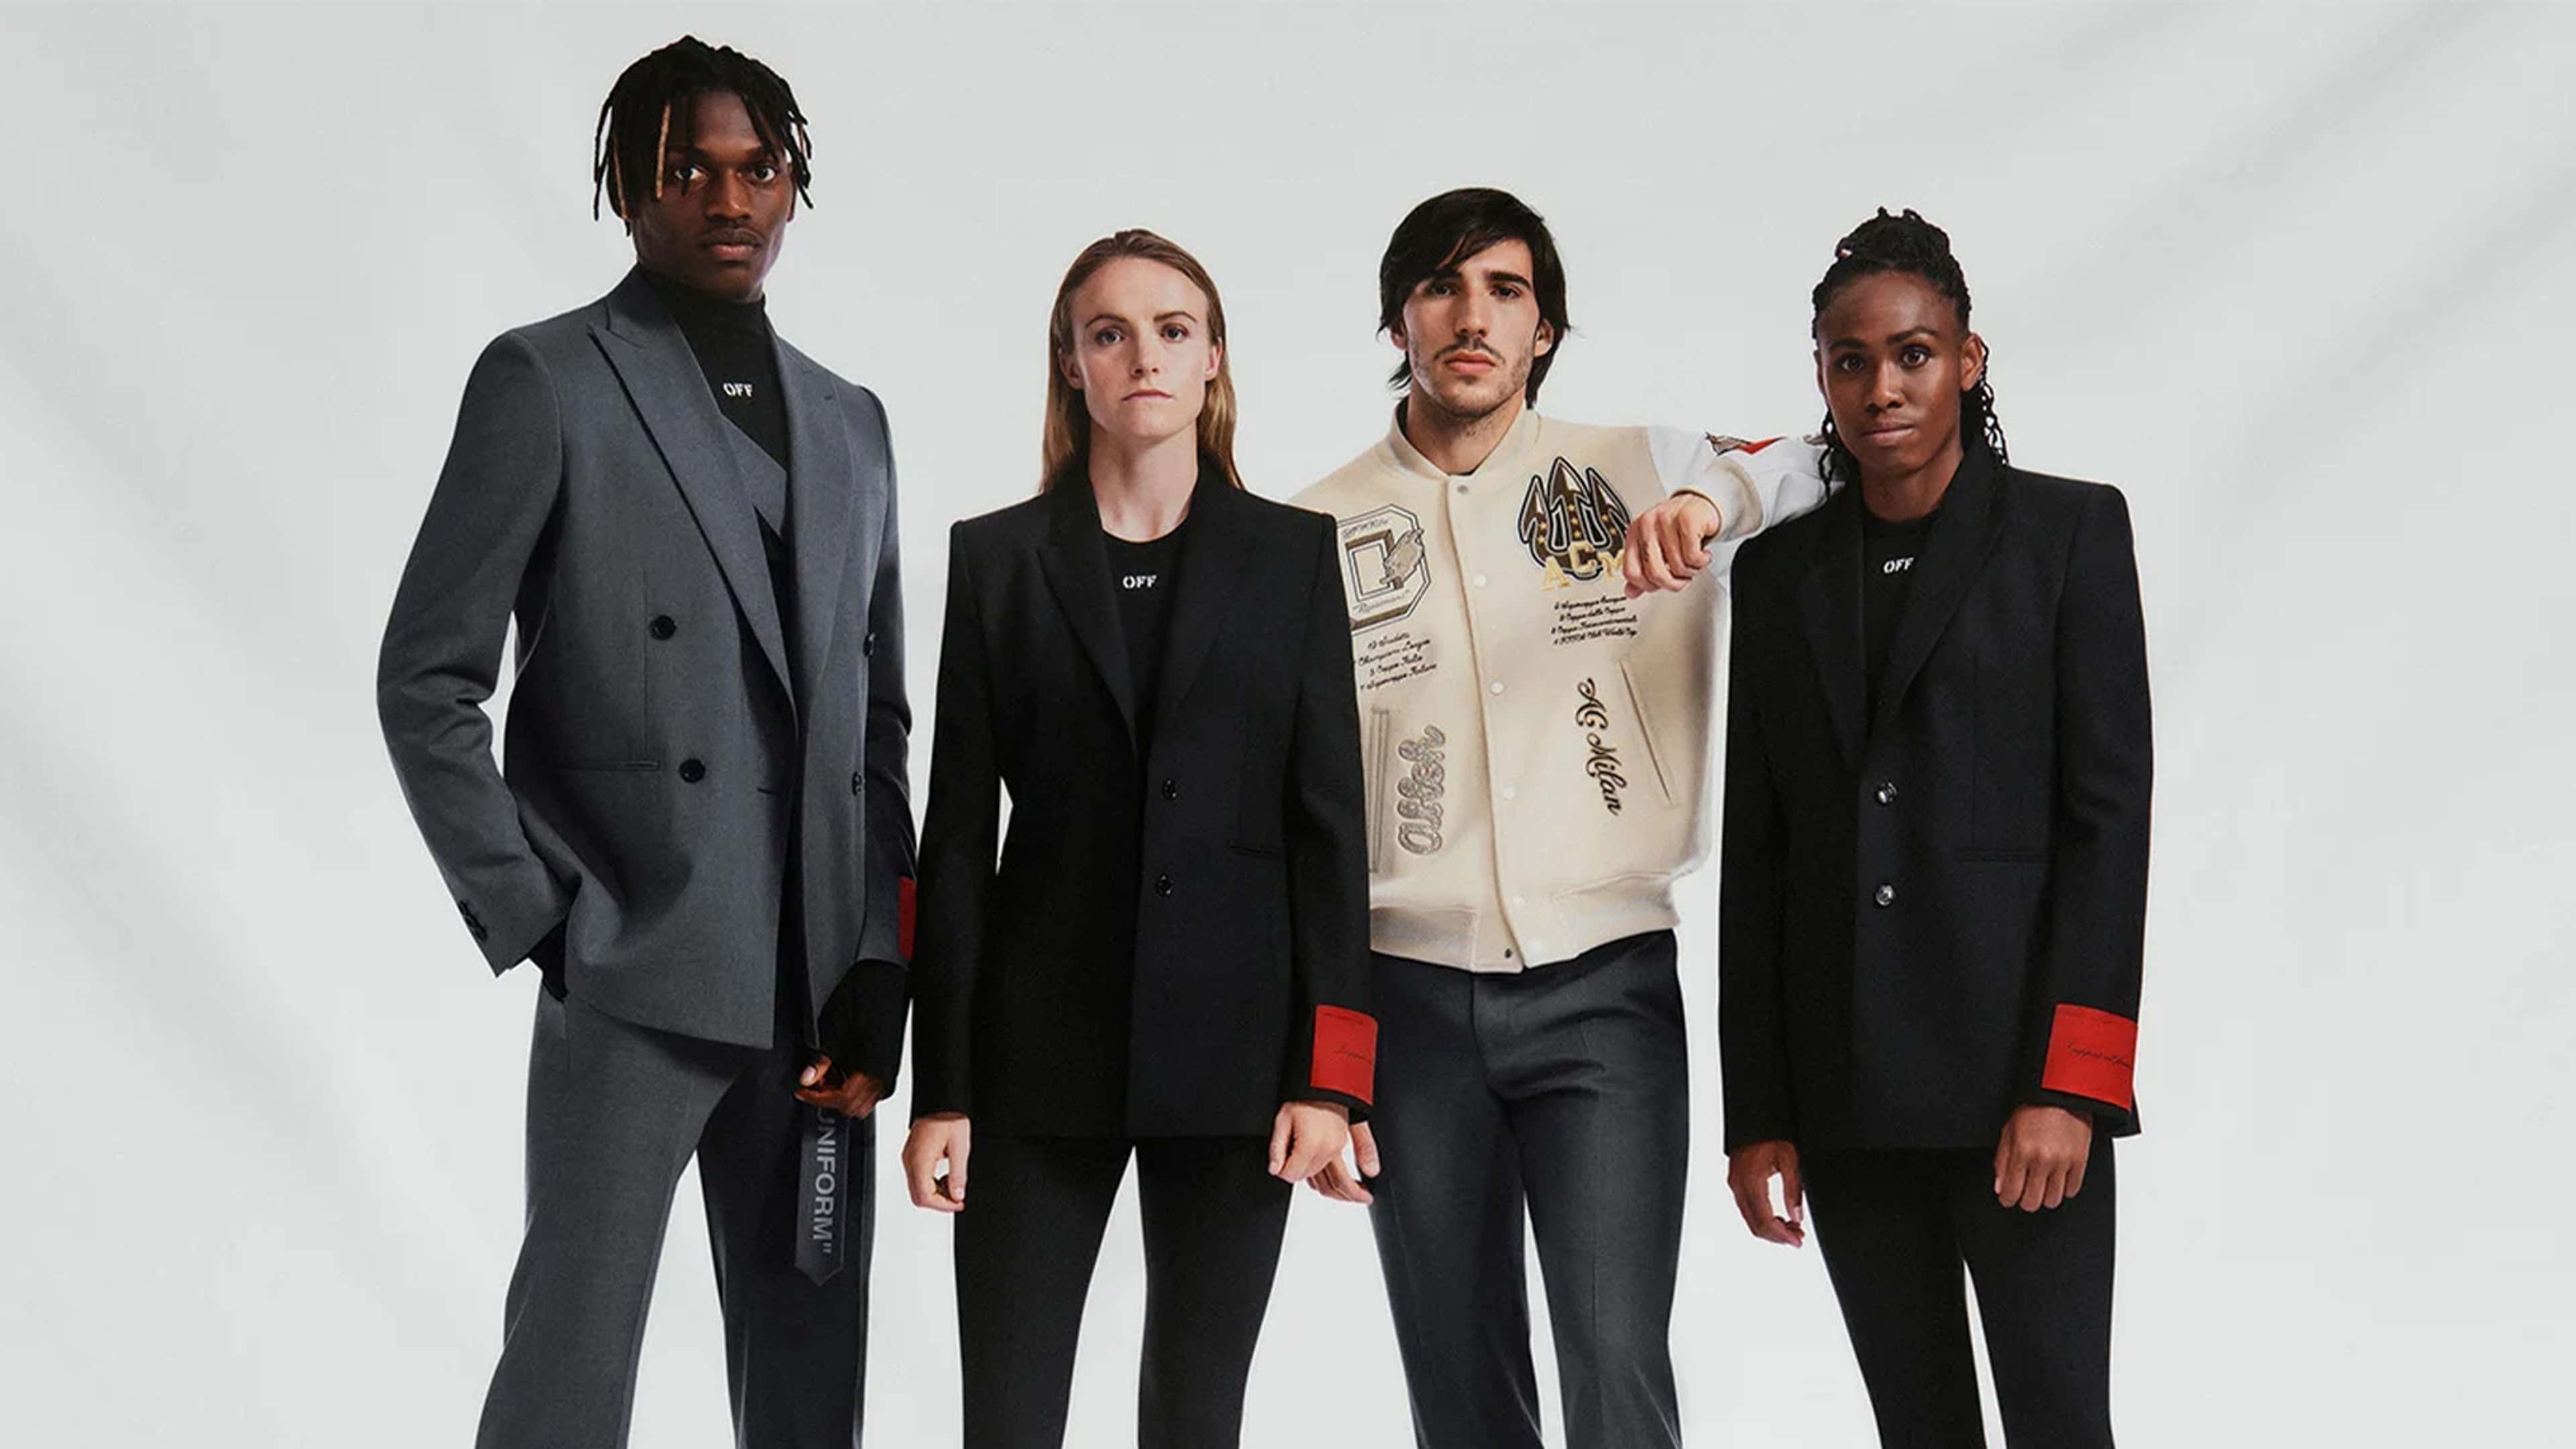 Arsenal Announces Official Formal Wear Partnership With 424